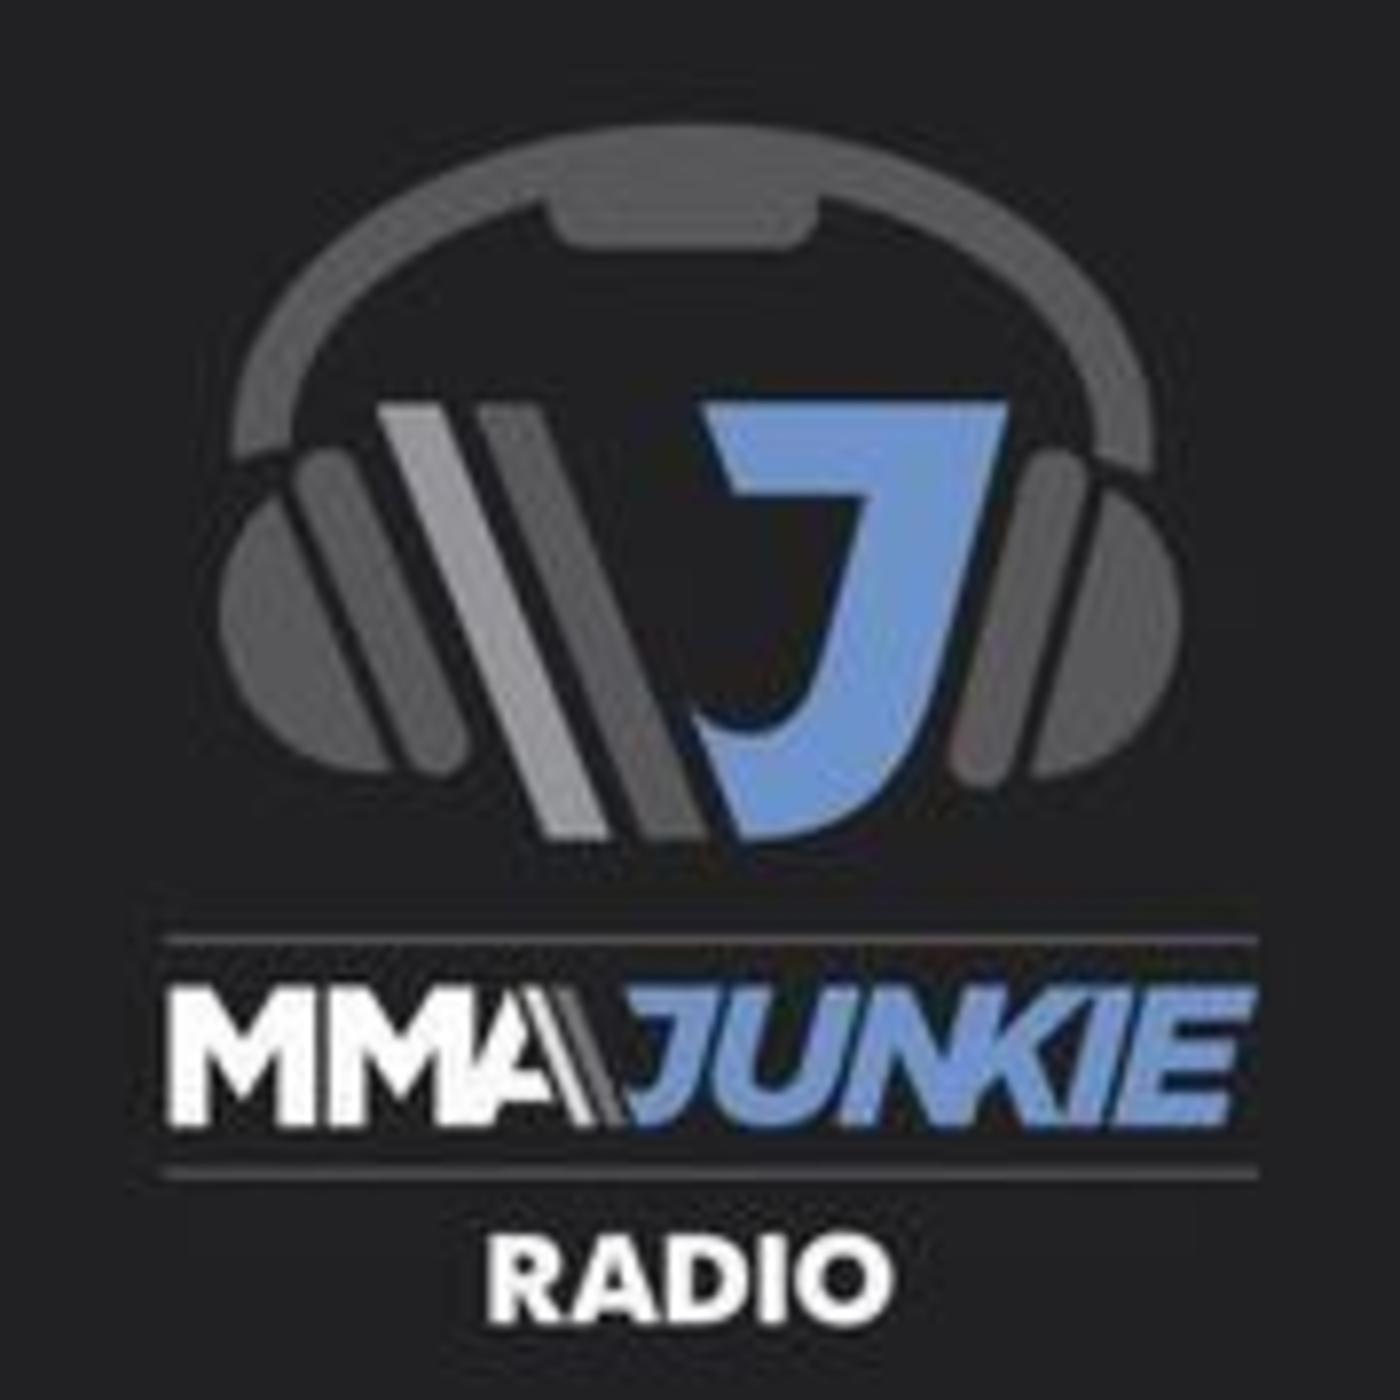 Ep. 3,041: Thoughts on UFC 249 latest, Cejudo-Garbrandt beef, more